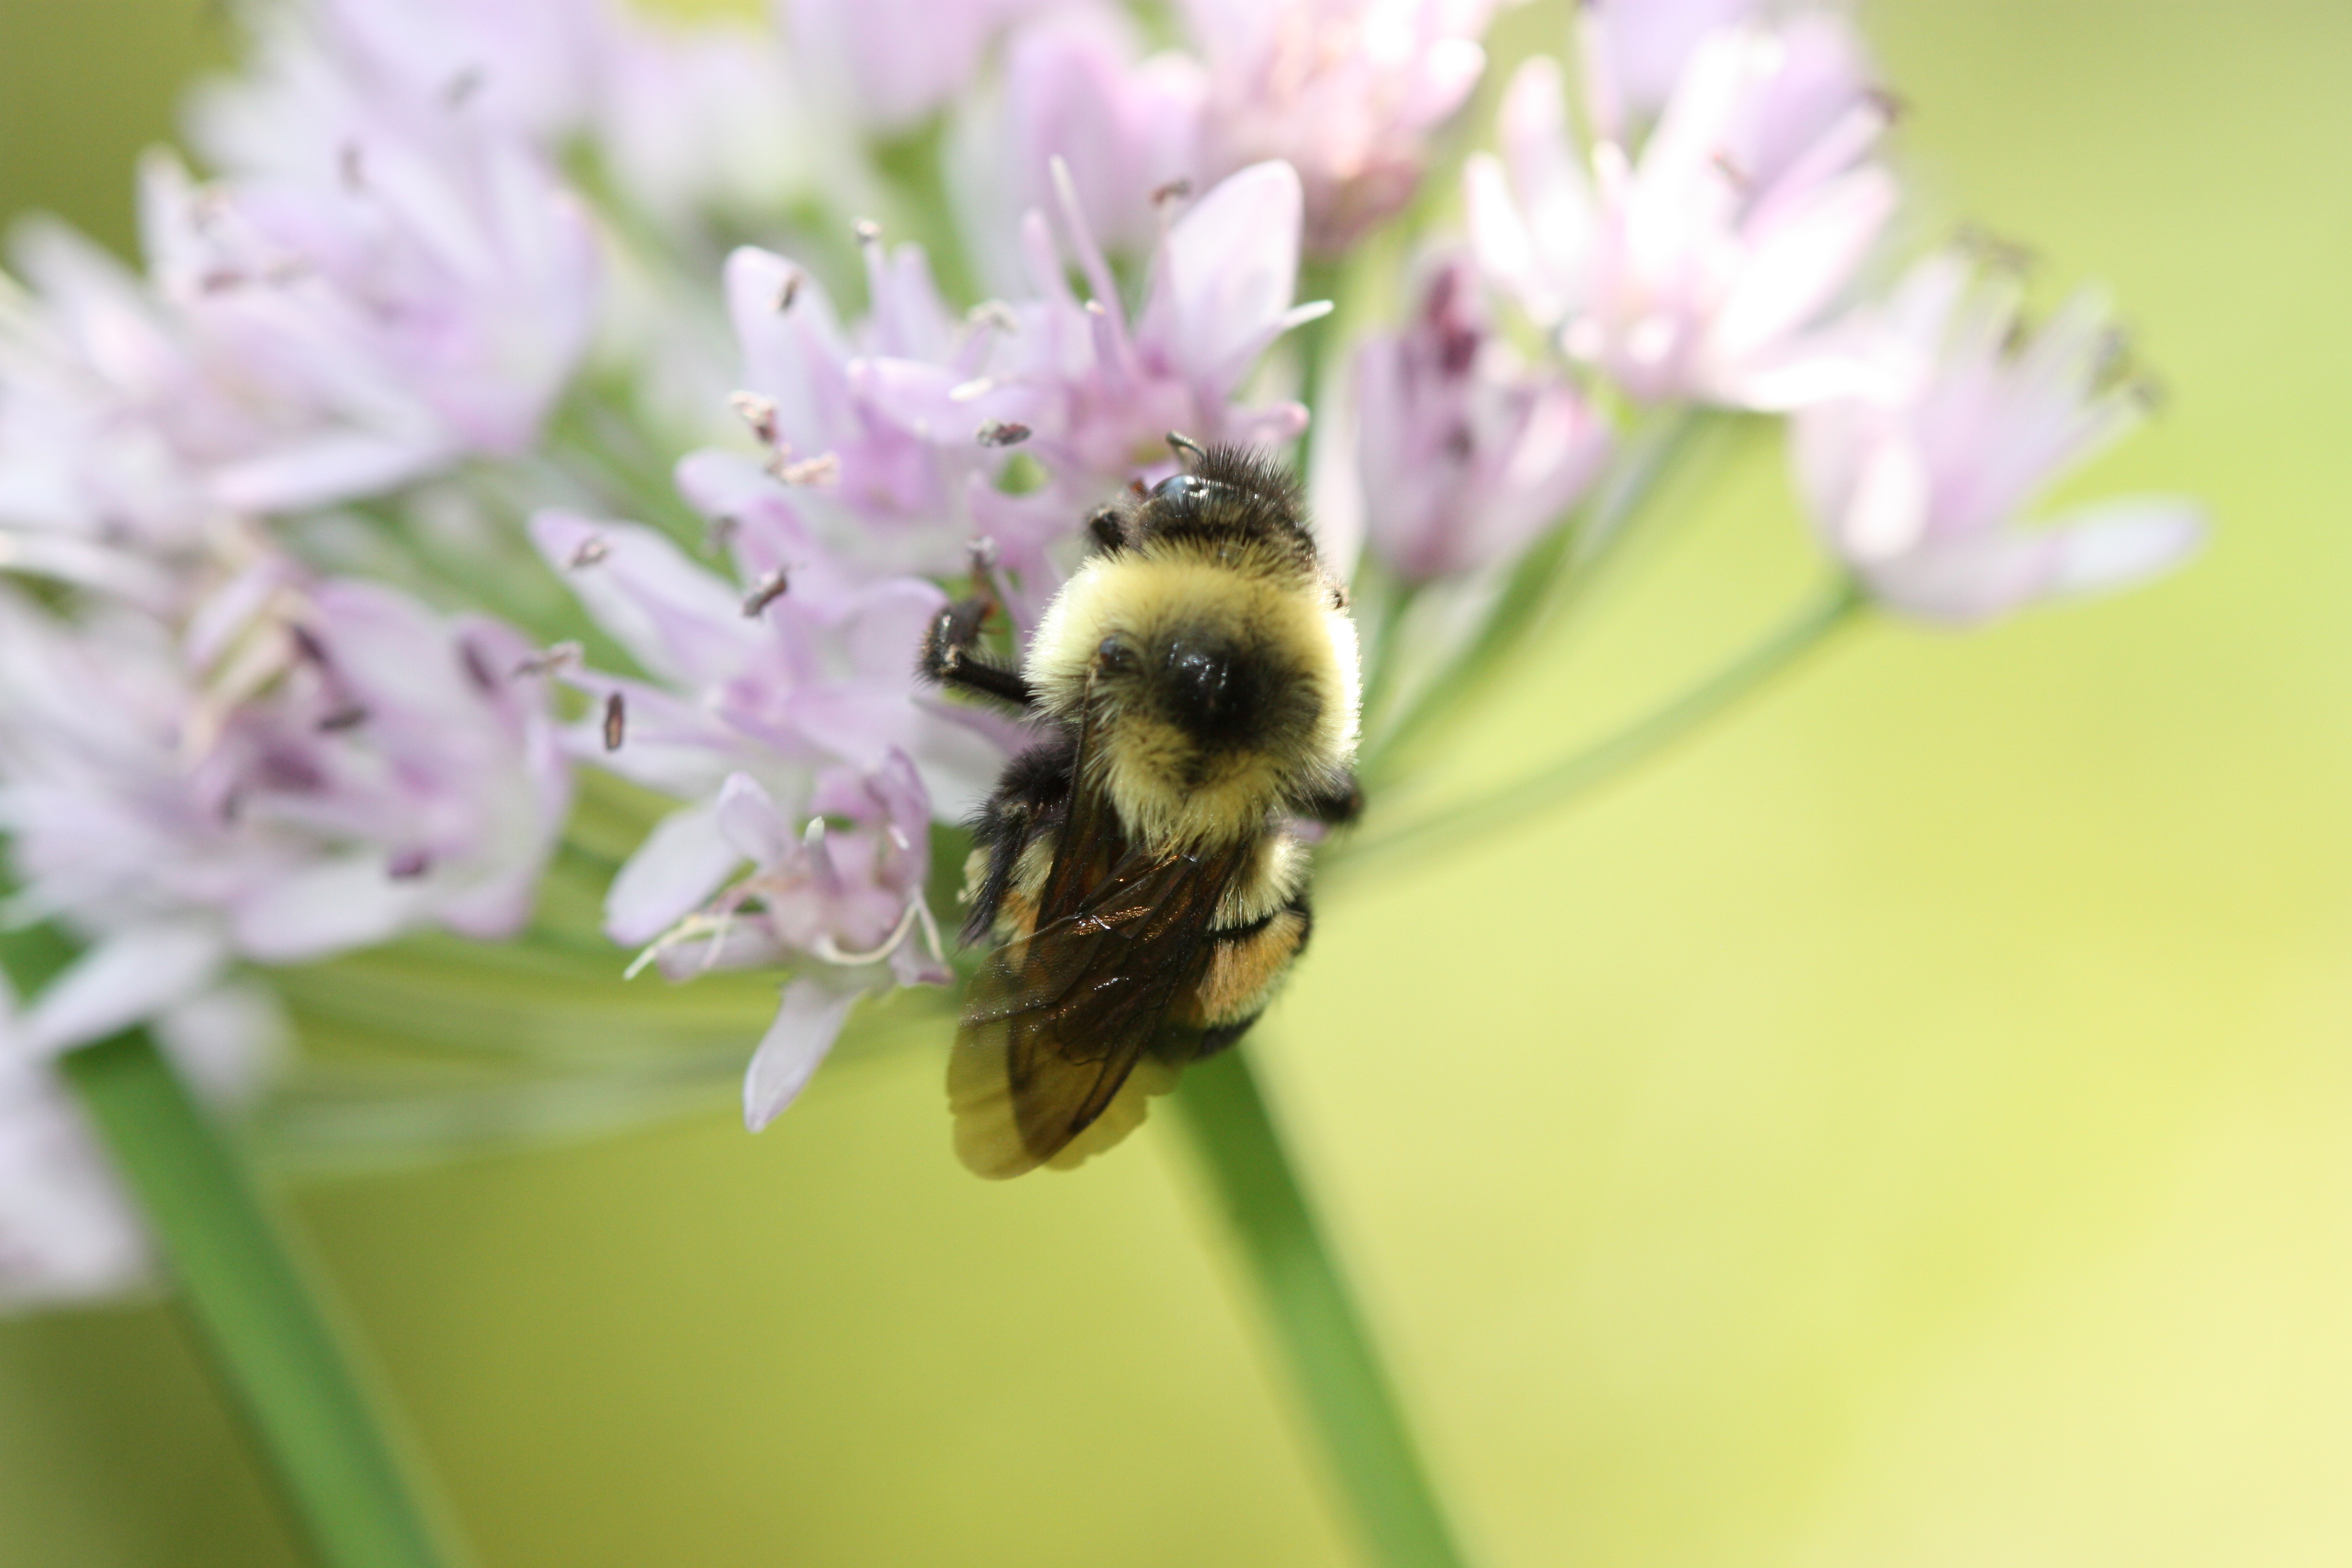 A fuzzy bumble bee clings to small, pinkish-purple flowers.